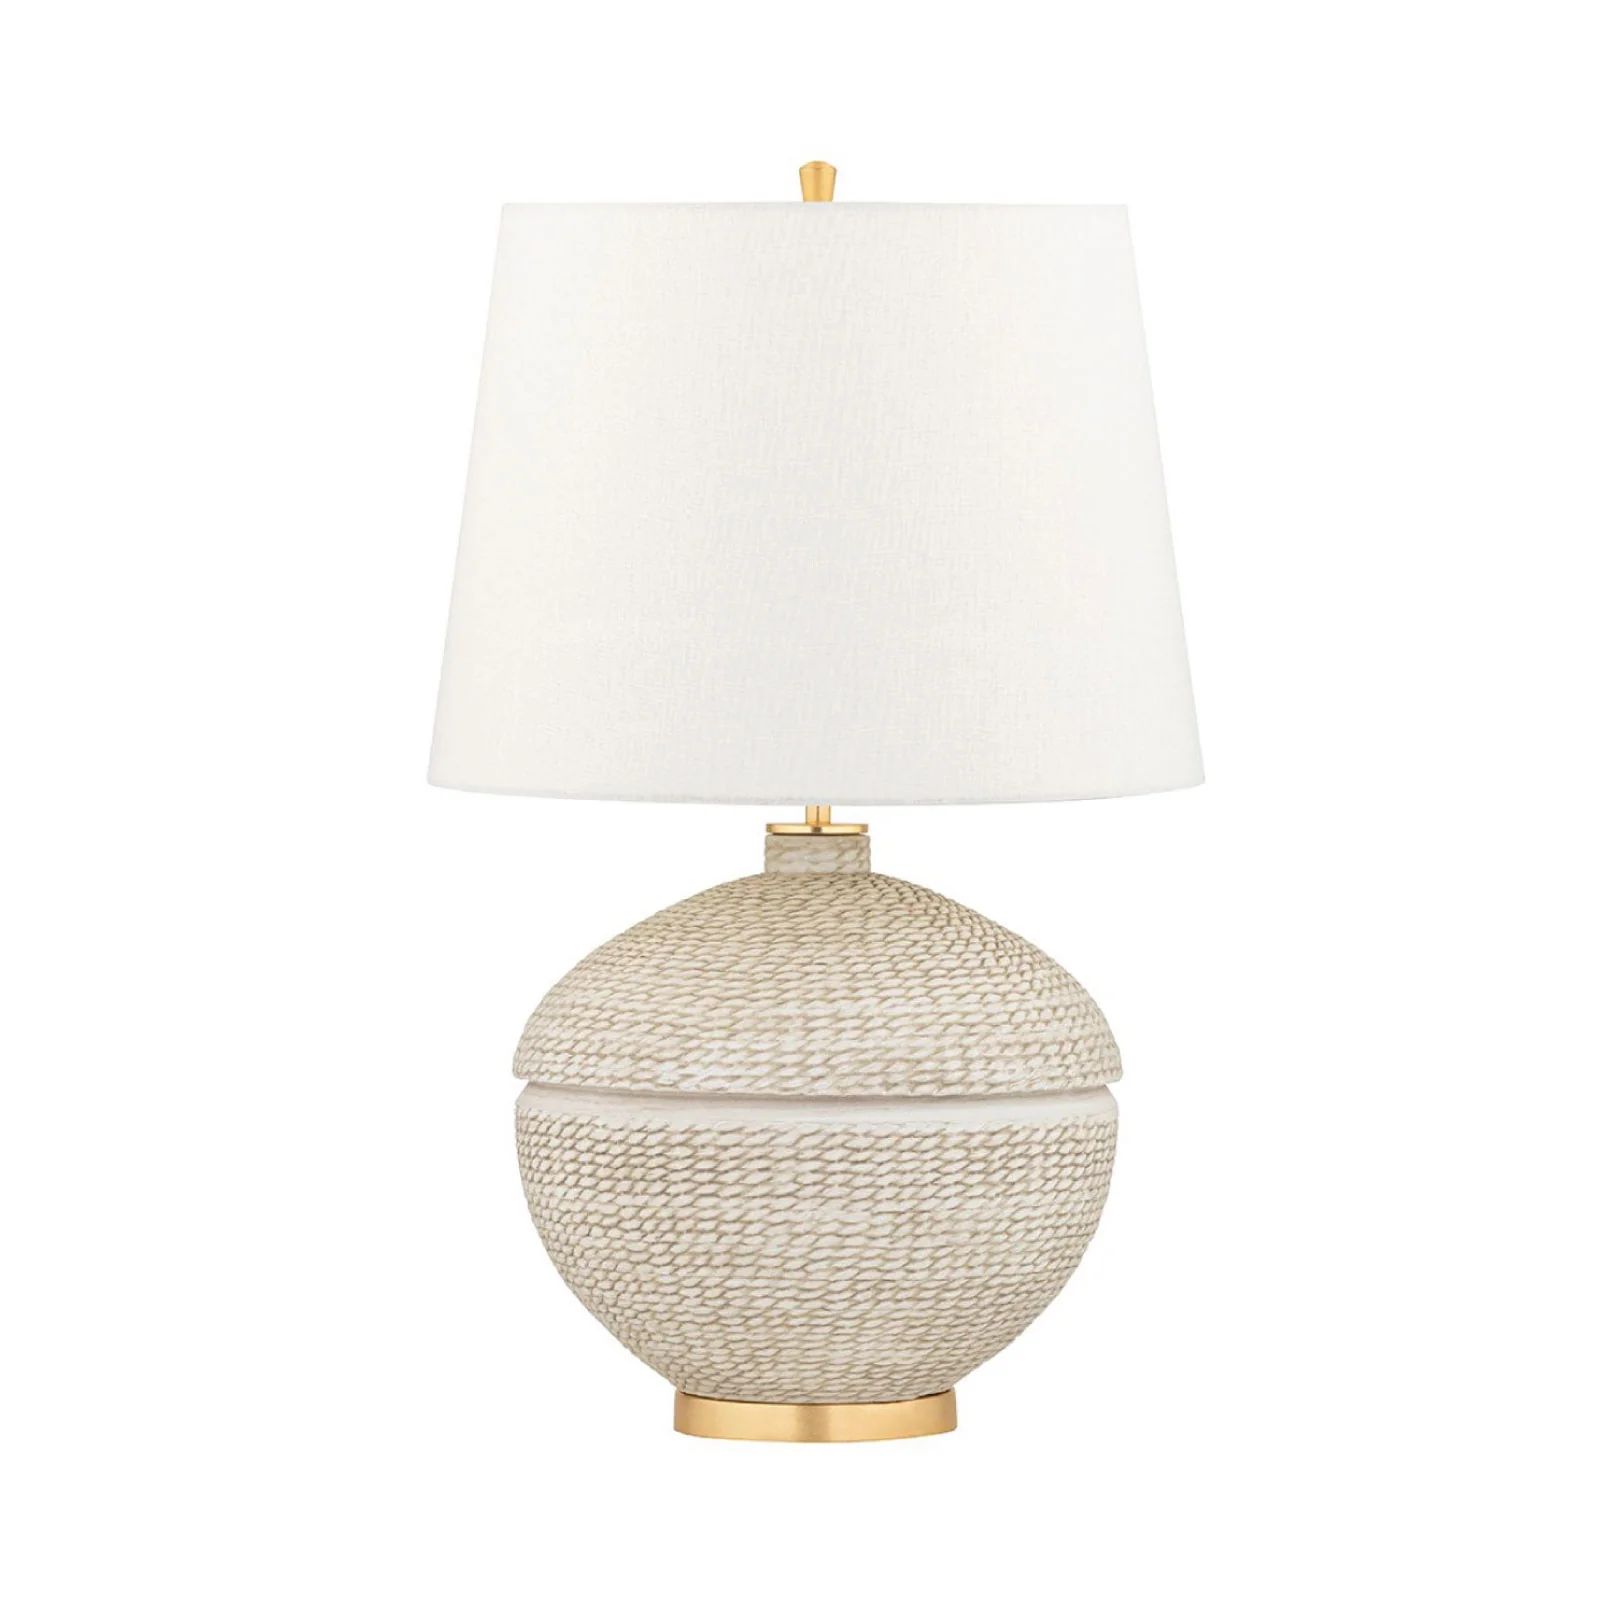 Hamlet Table Lamp | Brooke and Lou